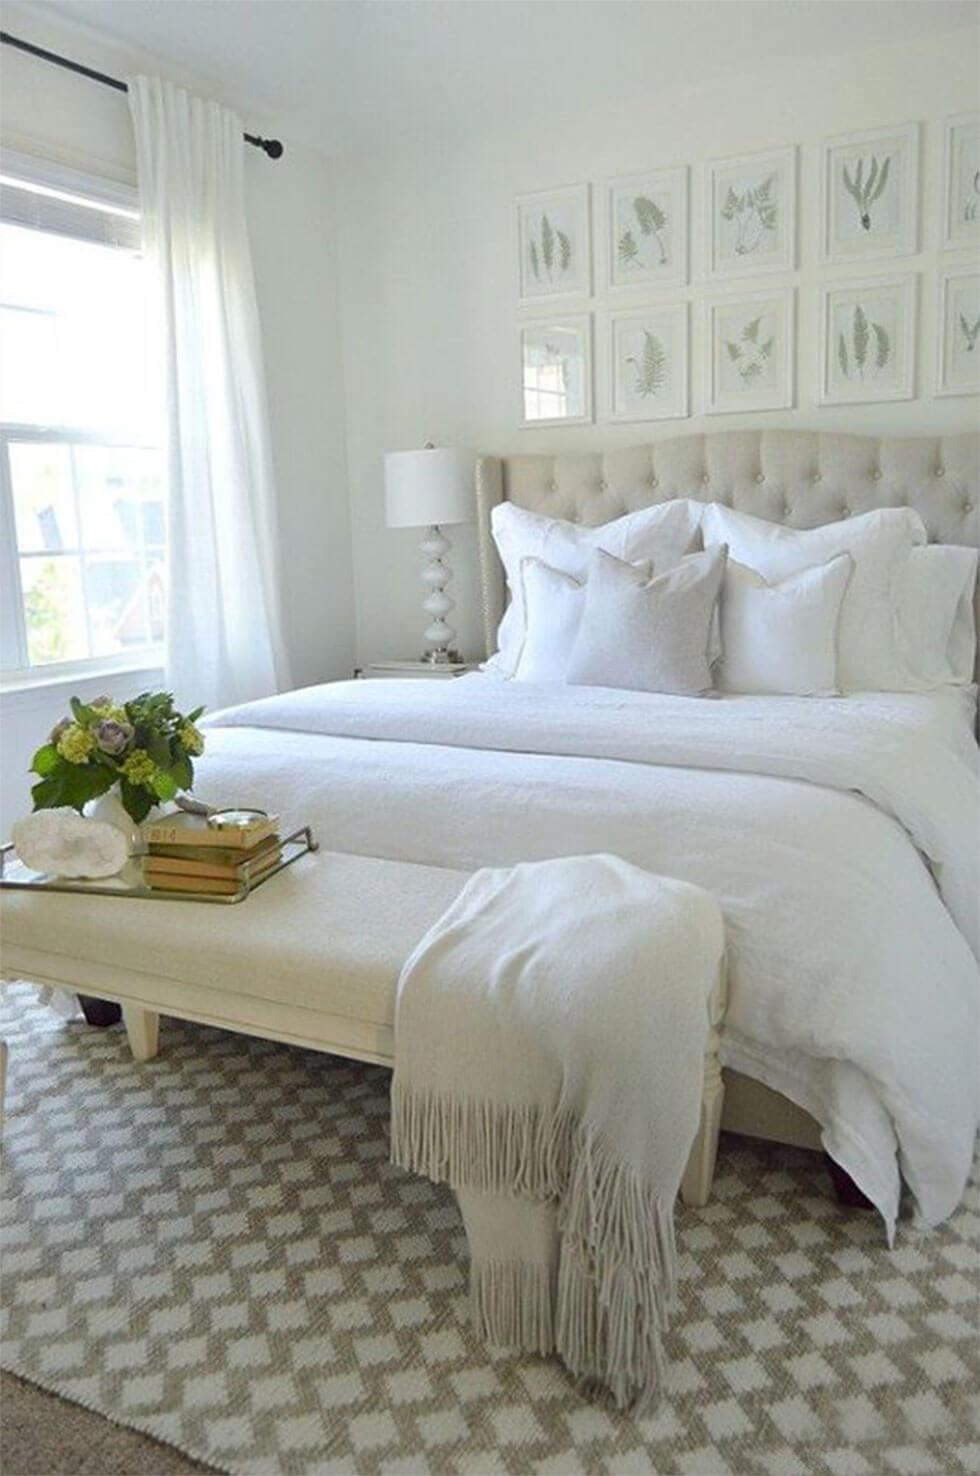 All-white bedroom with tufted headboard, linen bedding and upholstered bench.